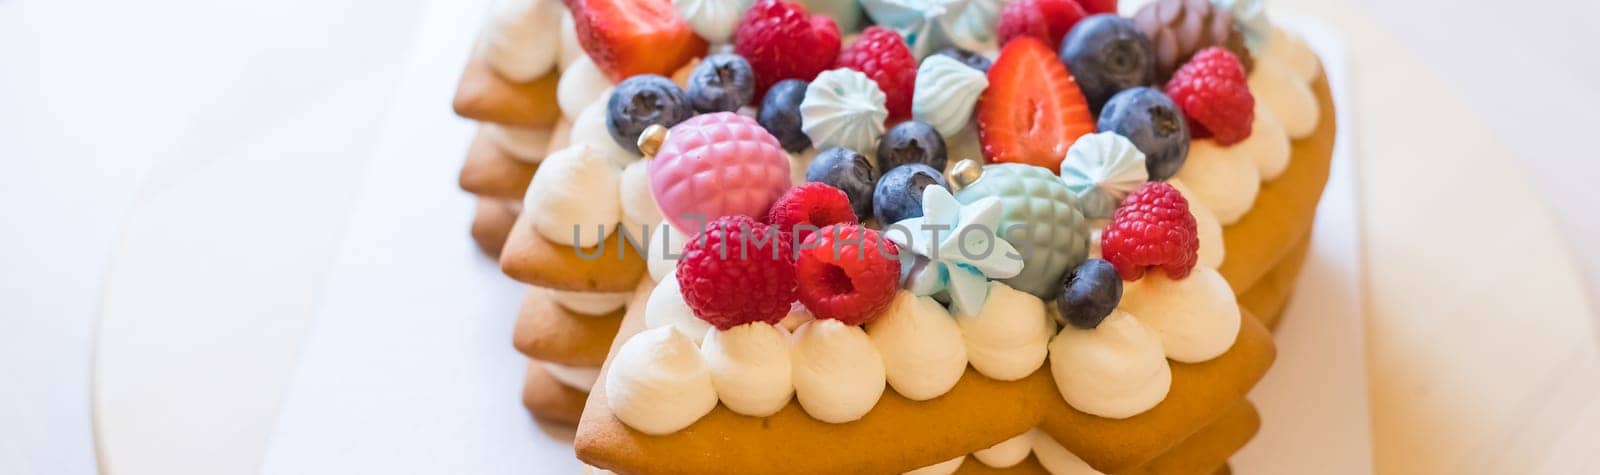 Homemade naked layered vanilla cake with whipped cream and fresh berries on top on white background. Summer cake. Copy space. web banner.berry cake, by YuliaYaspe1979